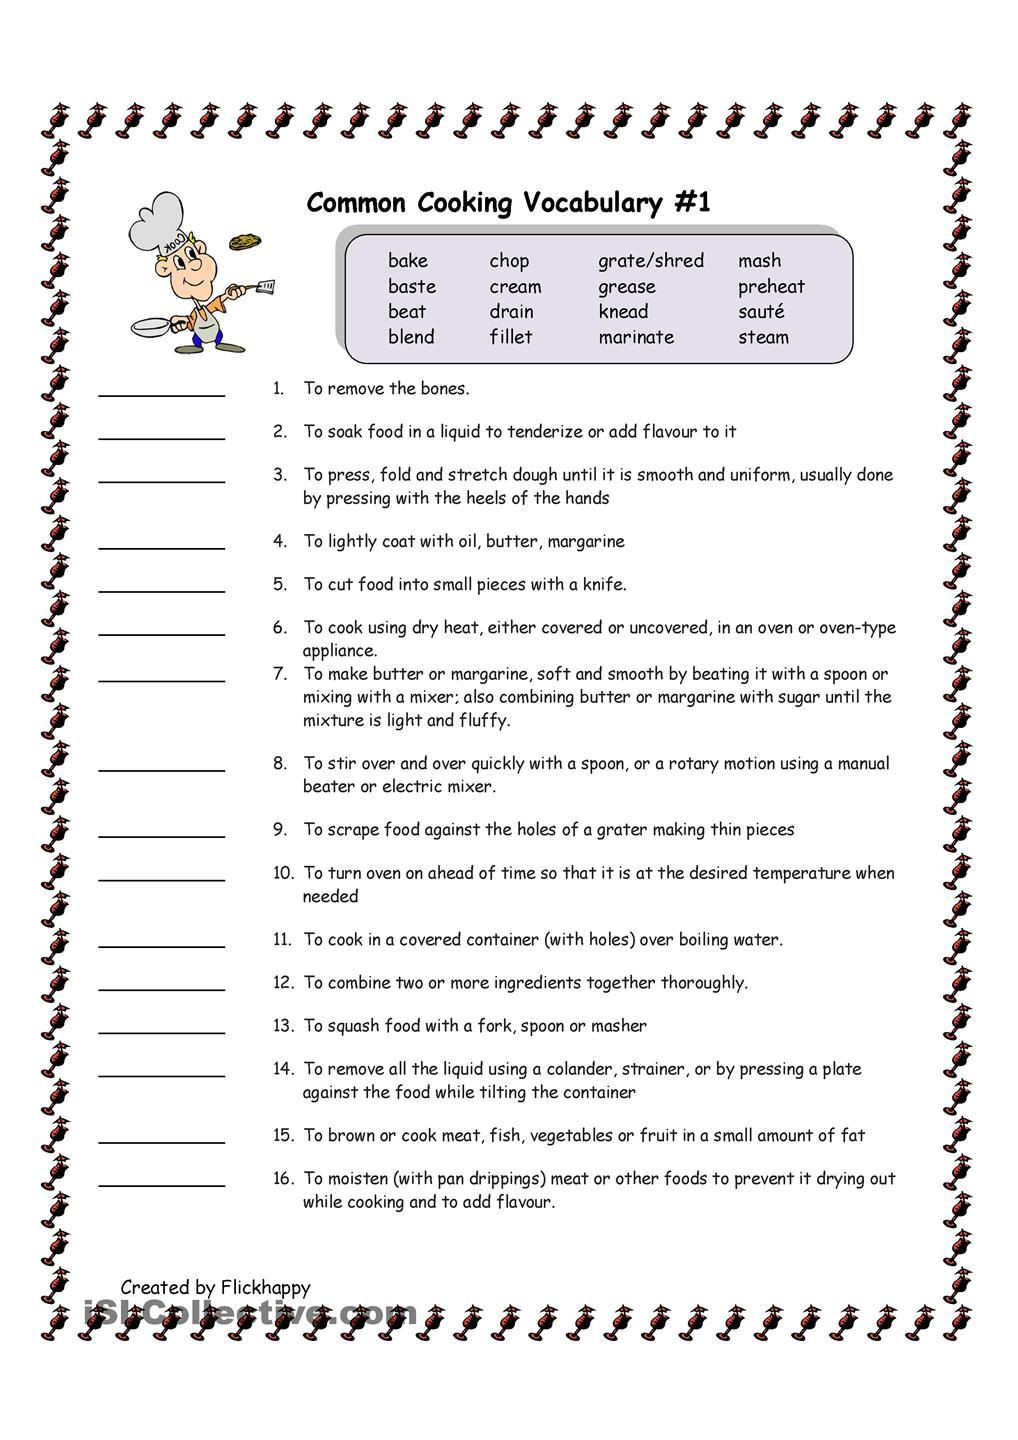 Basic Cooking Terms Worksheet Answers Mon Cooking Vocabulary 1